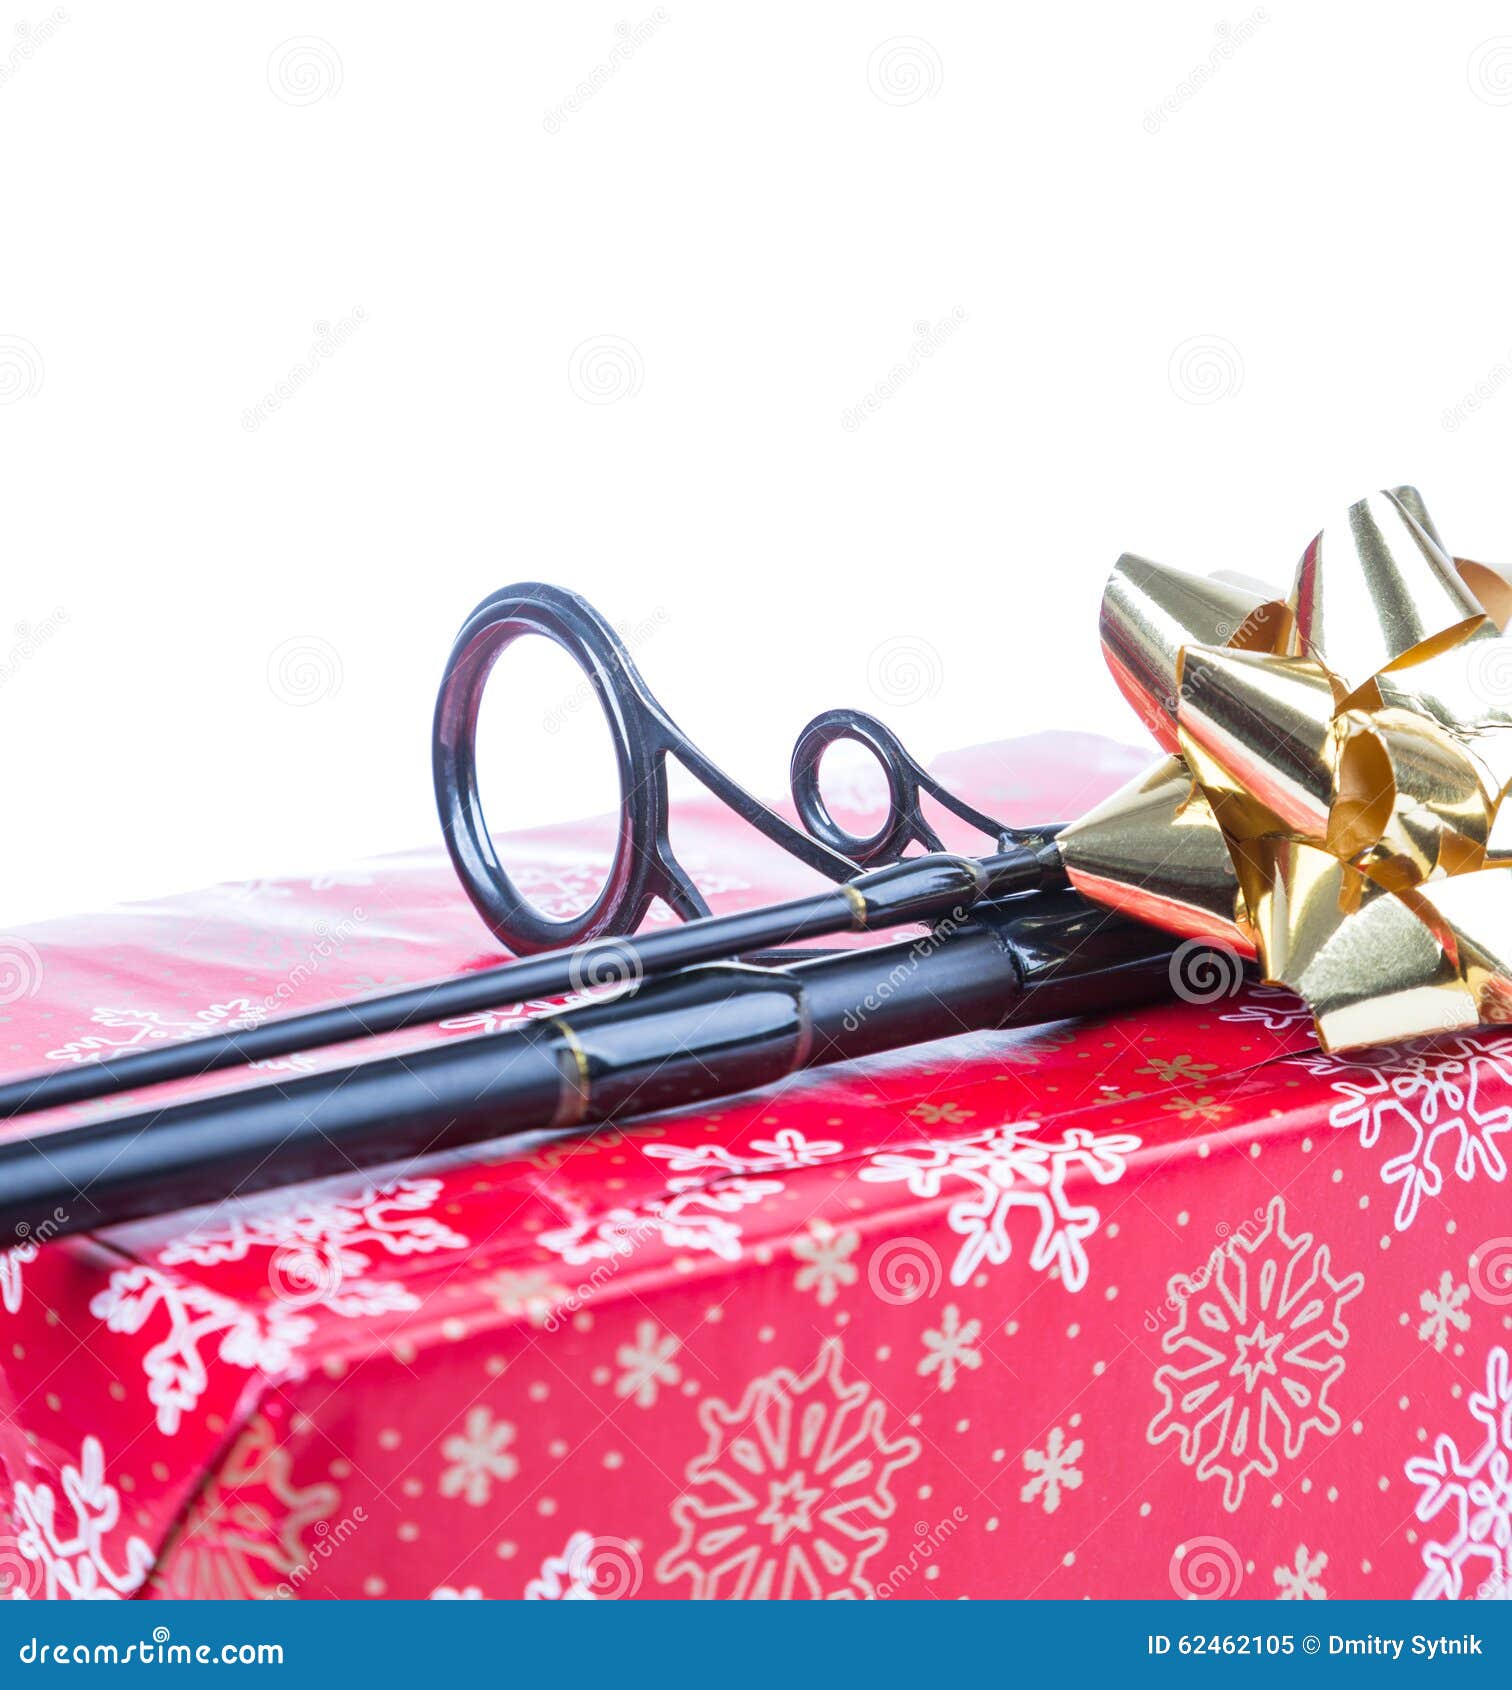 Christmas Gift in Box for Fishers Stock Image - Image of prepare